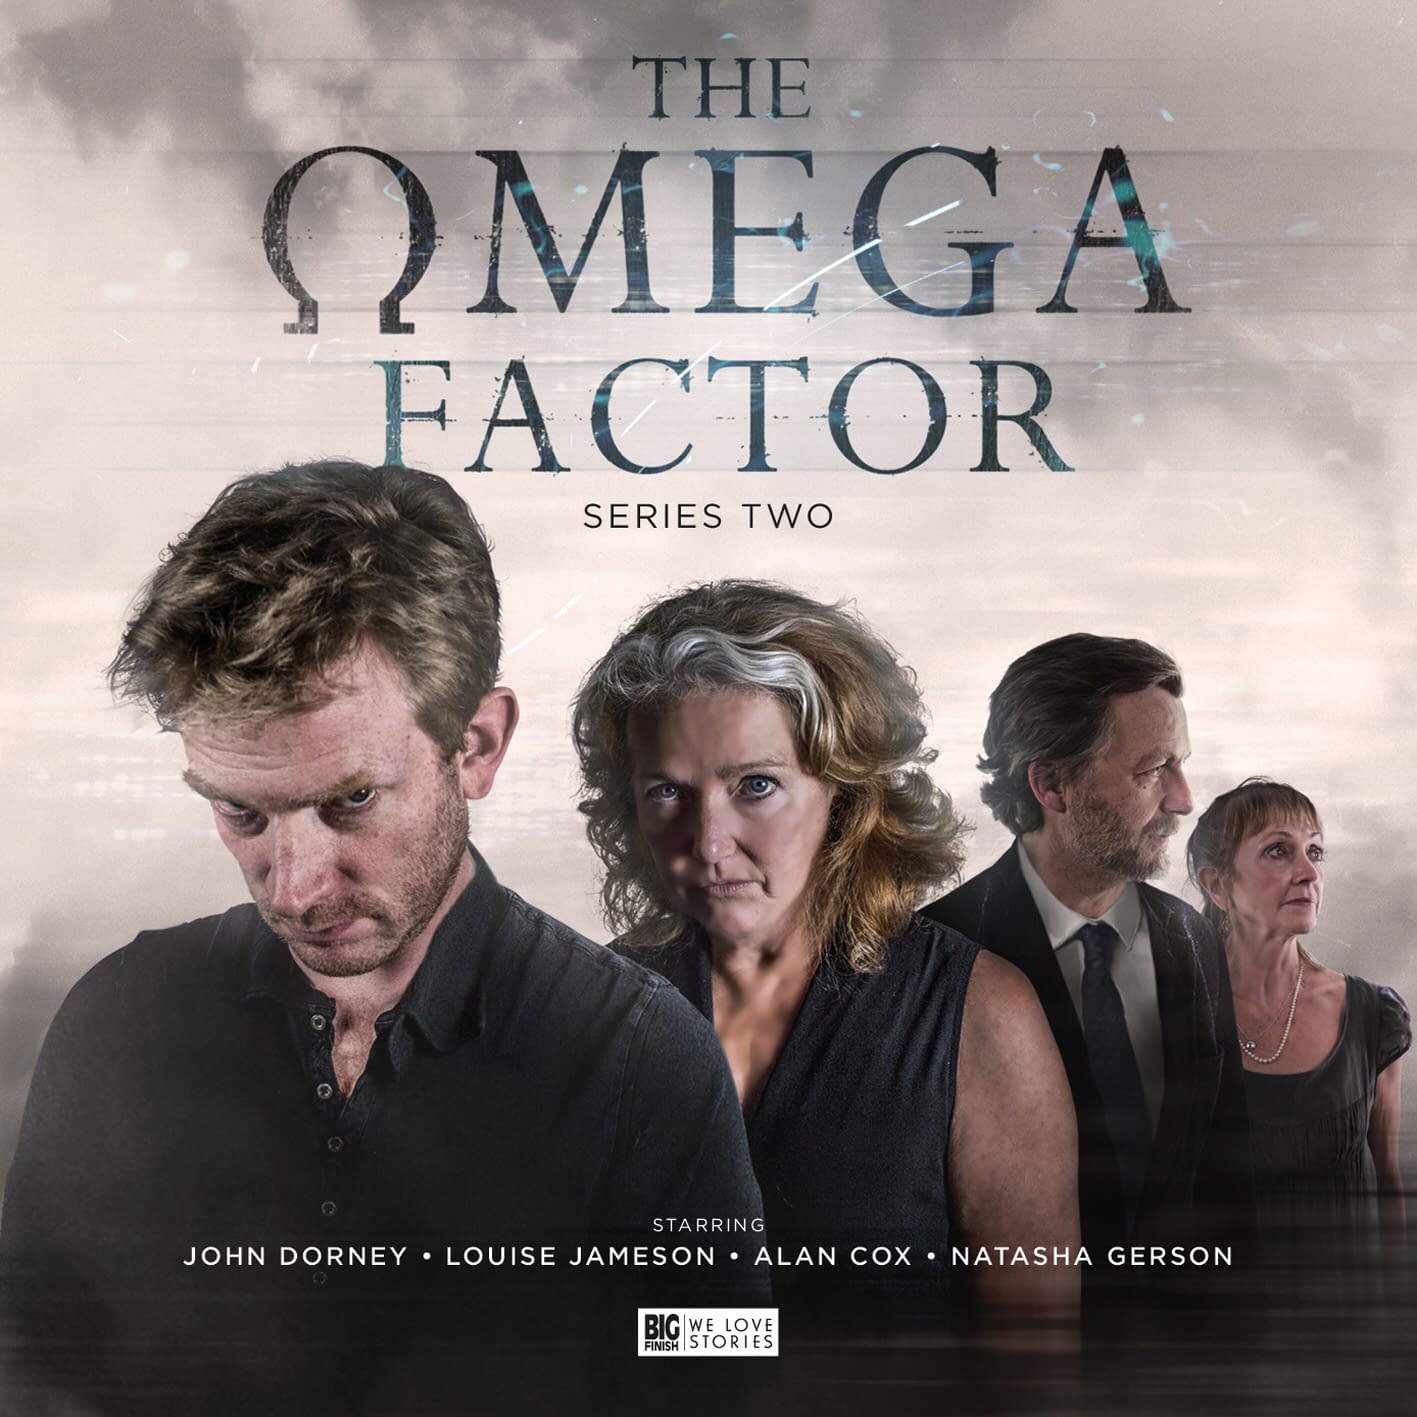 "The Omega Factor": Big Finish Releases 40th Anniversary Sequel to BBC Show that Inspired "The X Files"